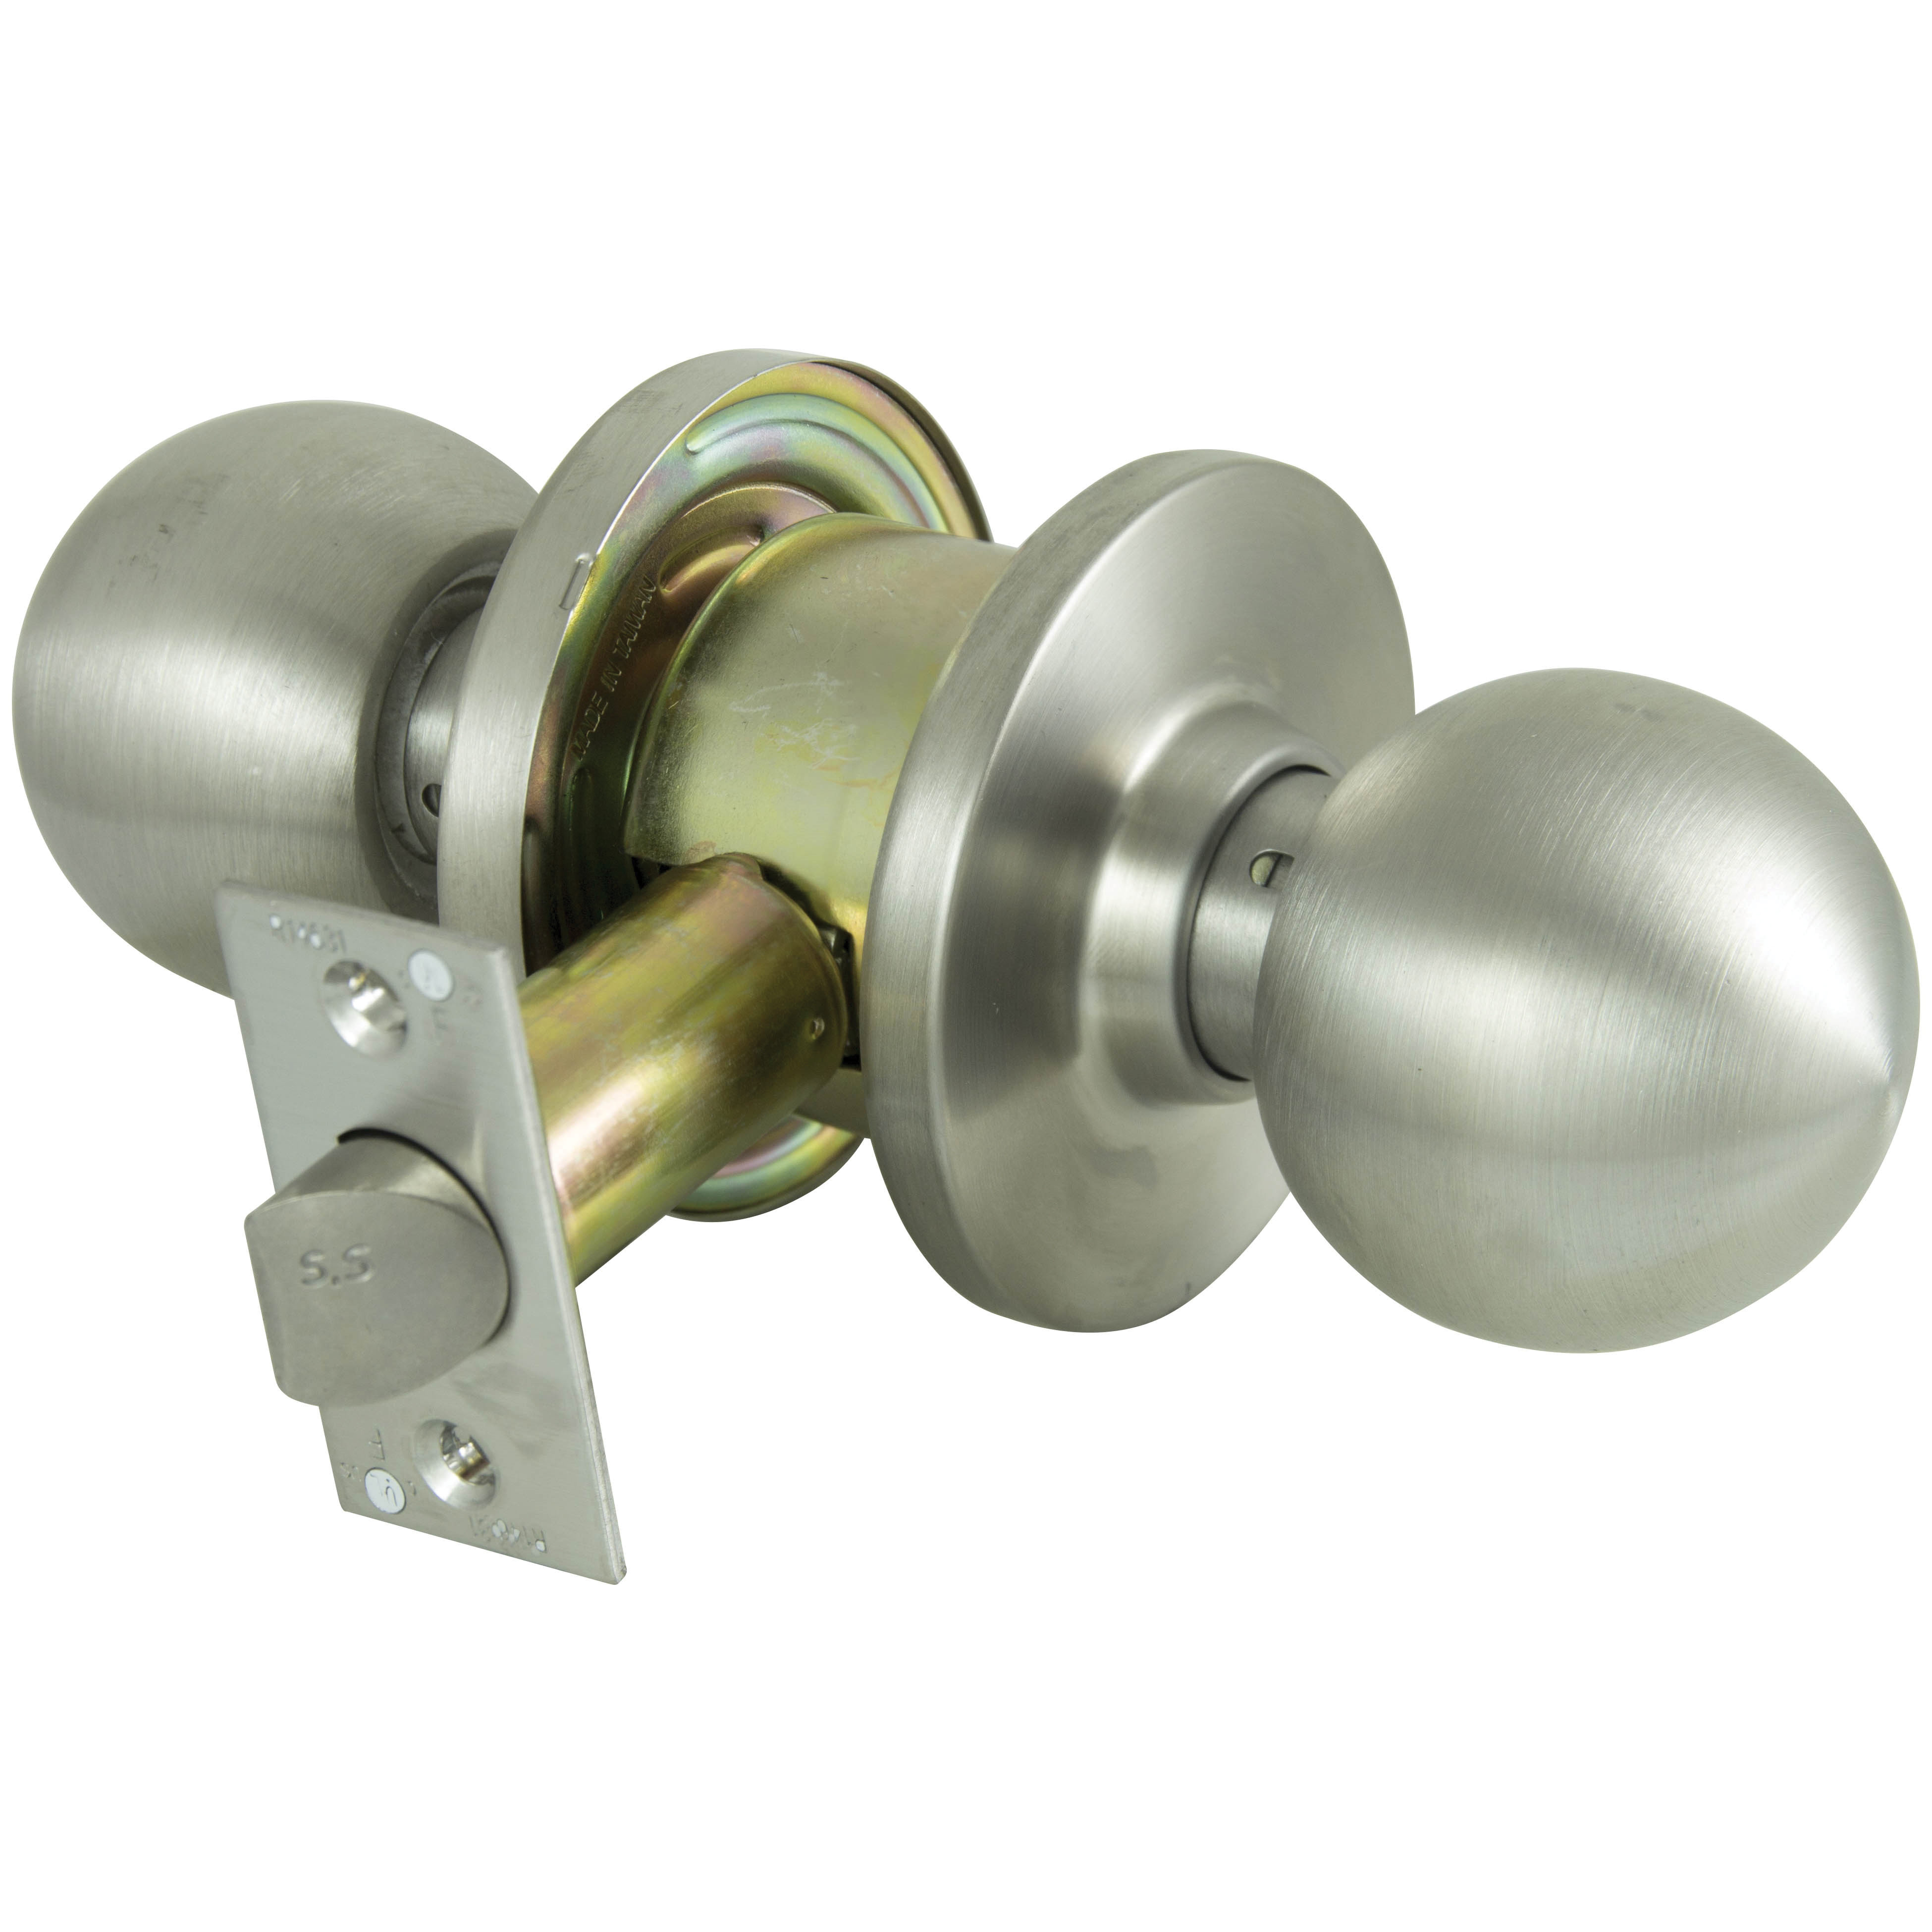 C363BV-PS Passage Knob, Metal, Stainless Steel, 2-3/4 in Backset, 1-1/4 to 1-13/16 in Thick Door